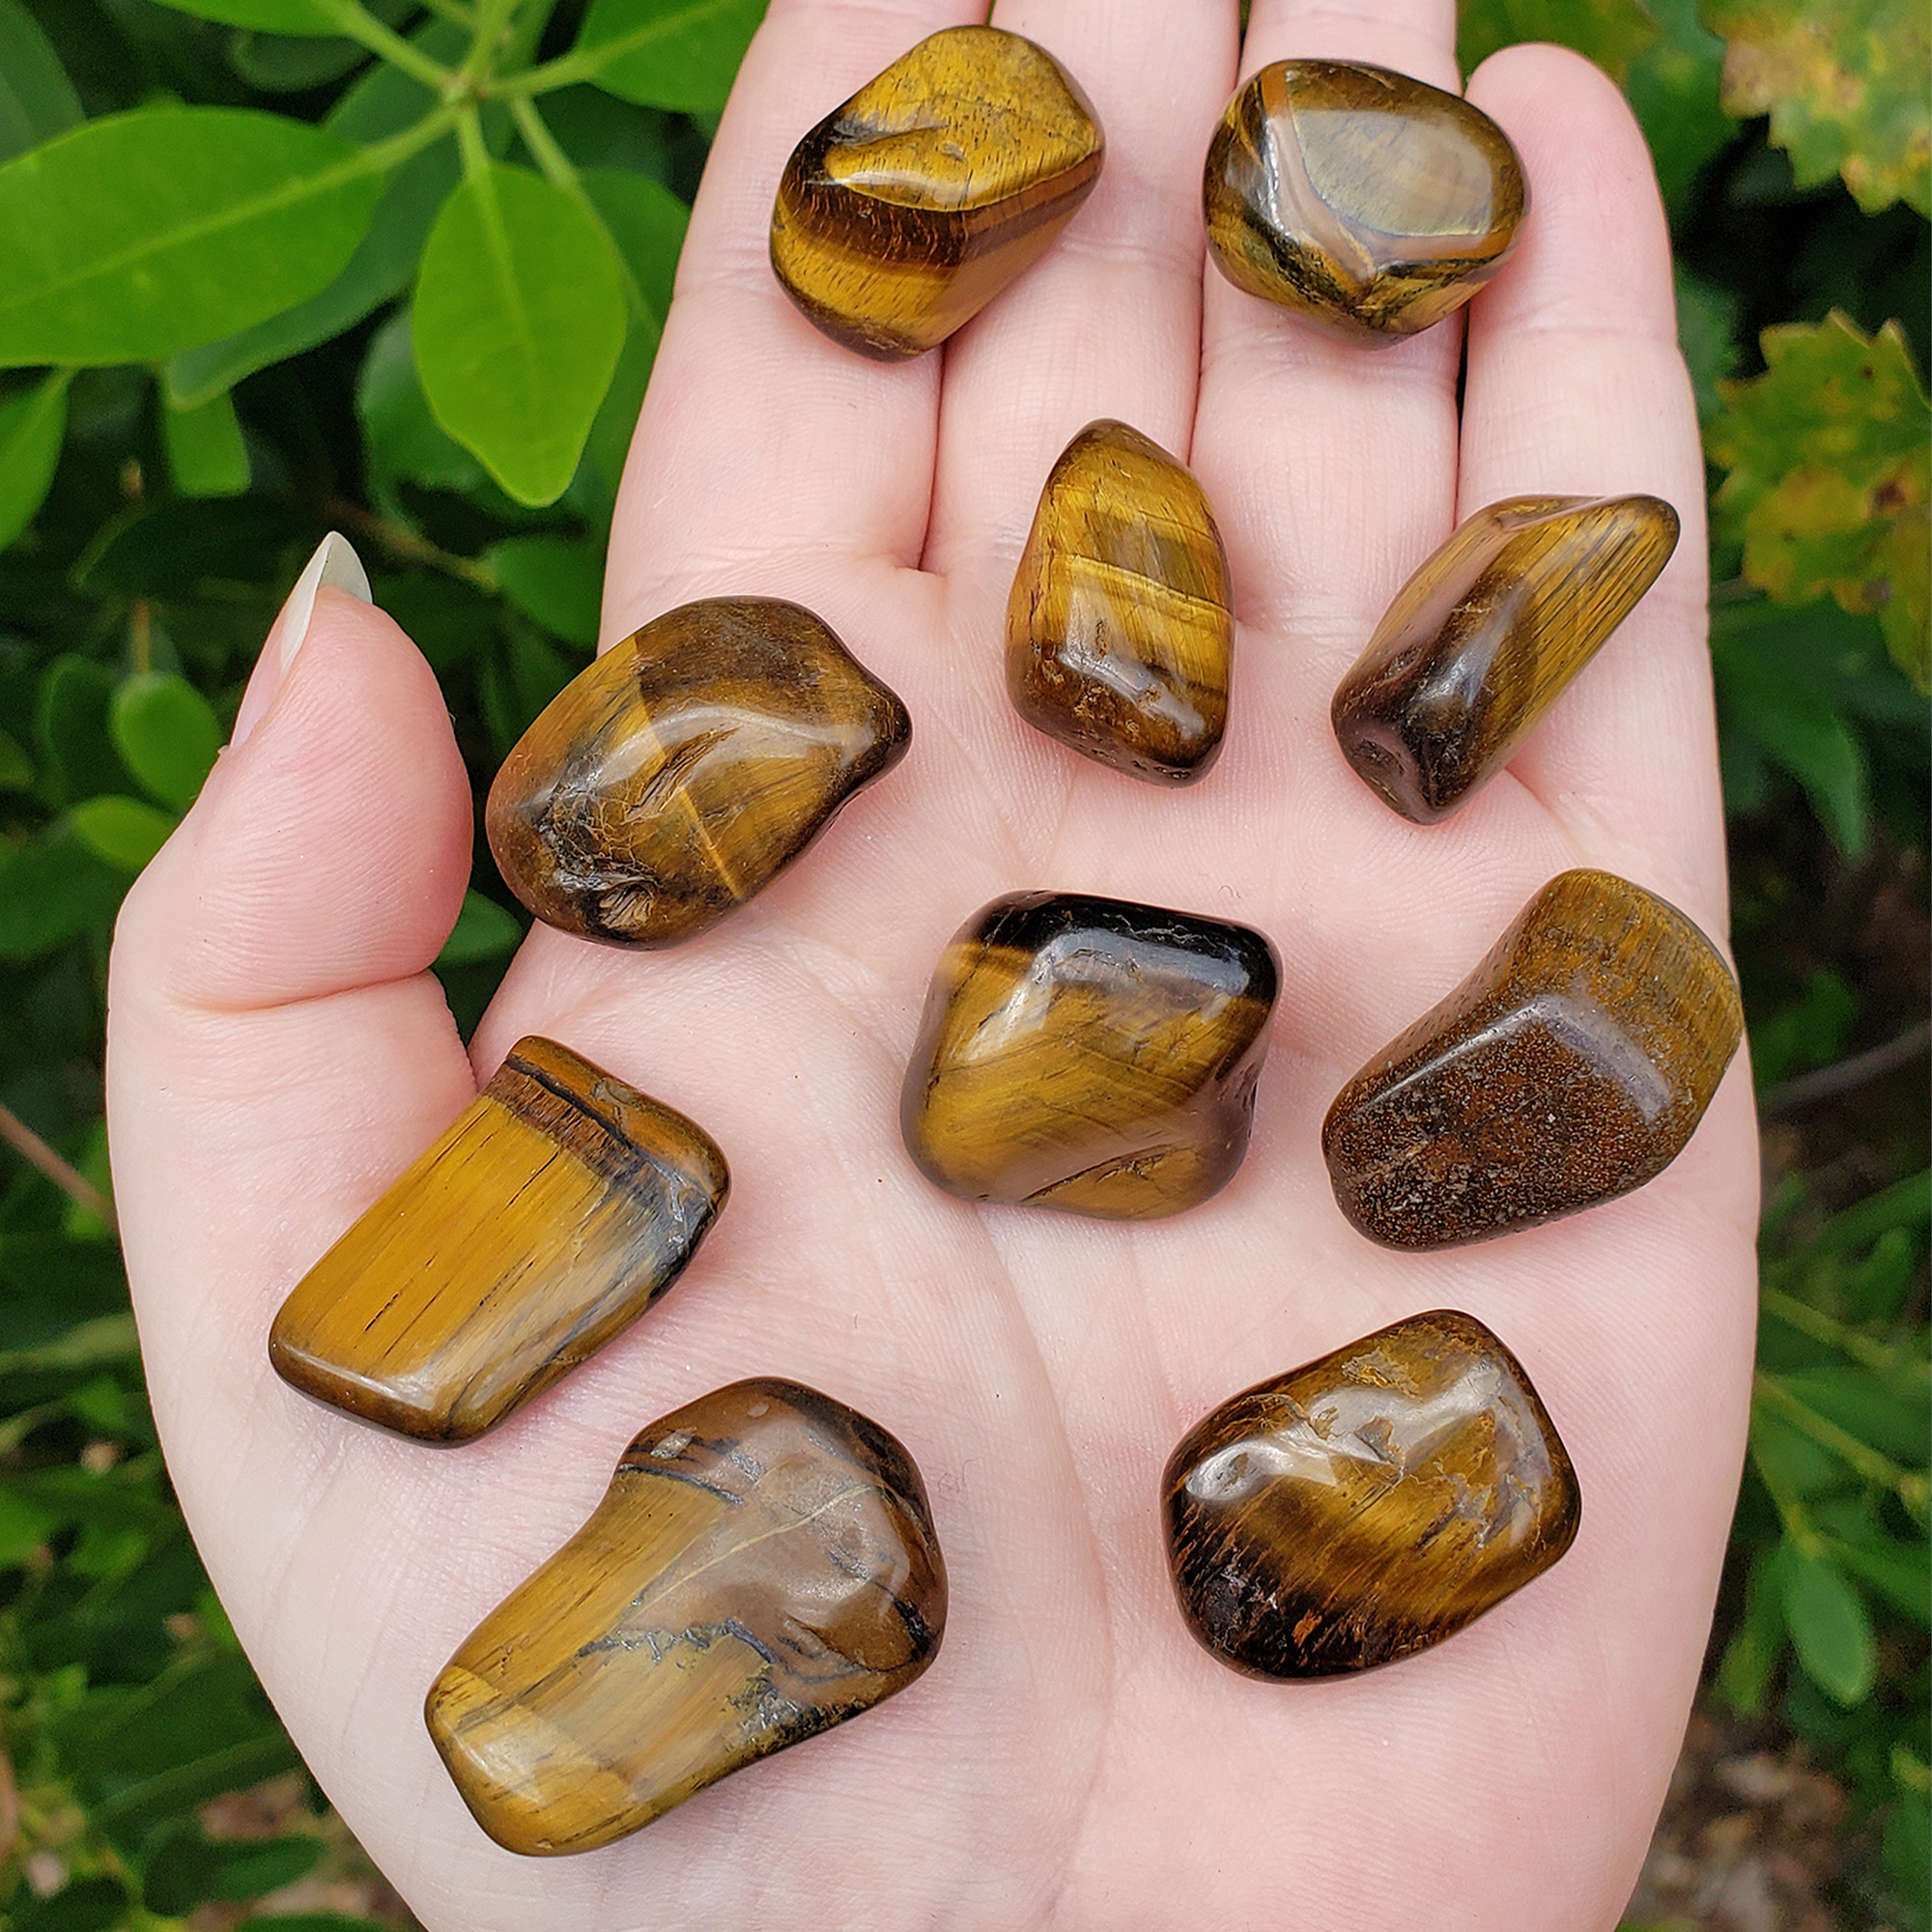 Tigers Eye Natural Tumbled Crystal - One Stone - Close Up in Hand